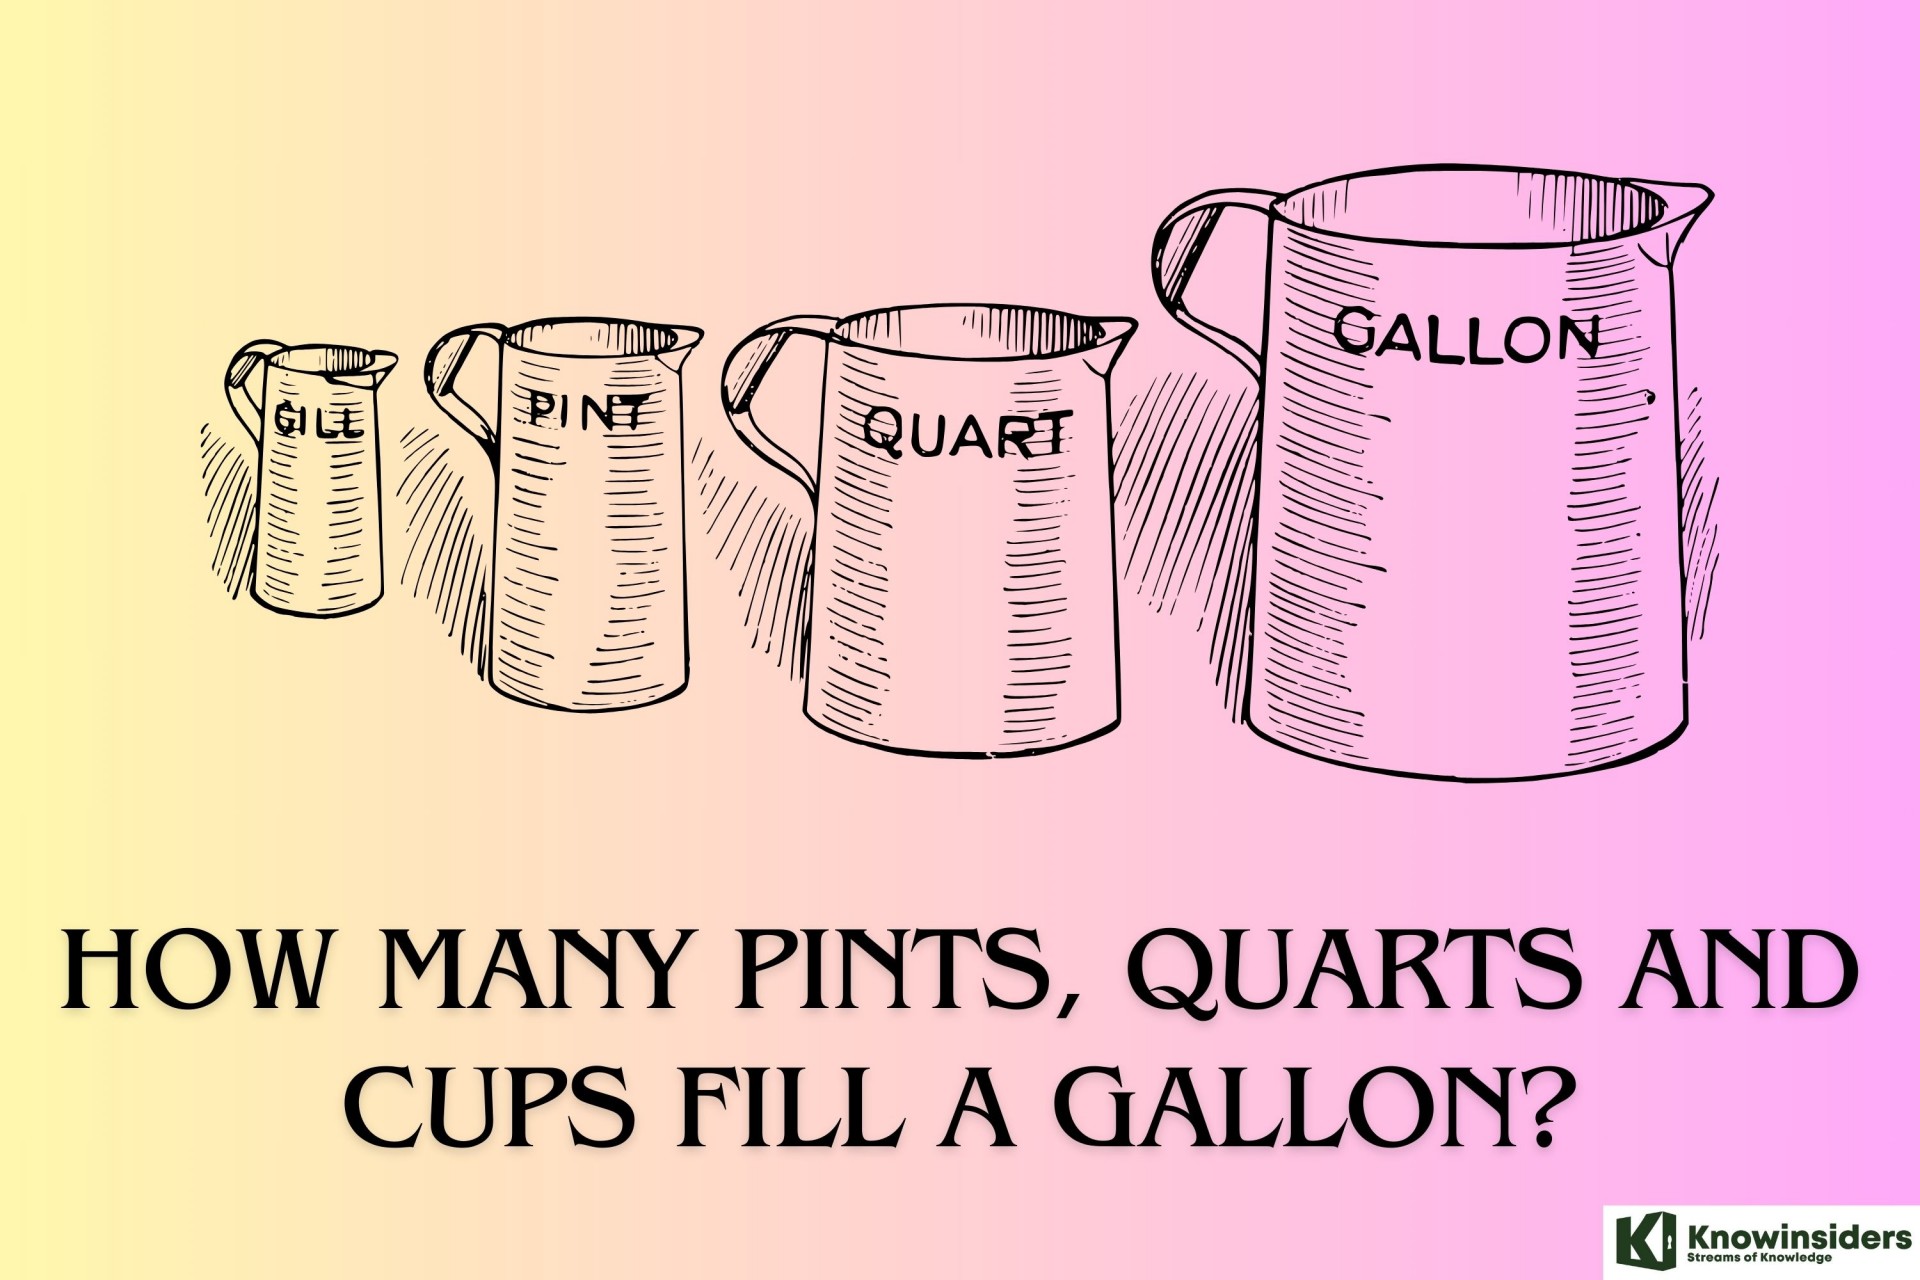 How Many Pints Fill a Gallon And How to Convert Pints into Gallons?